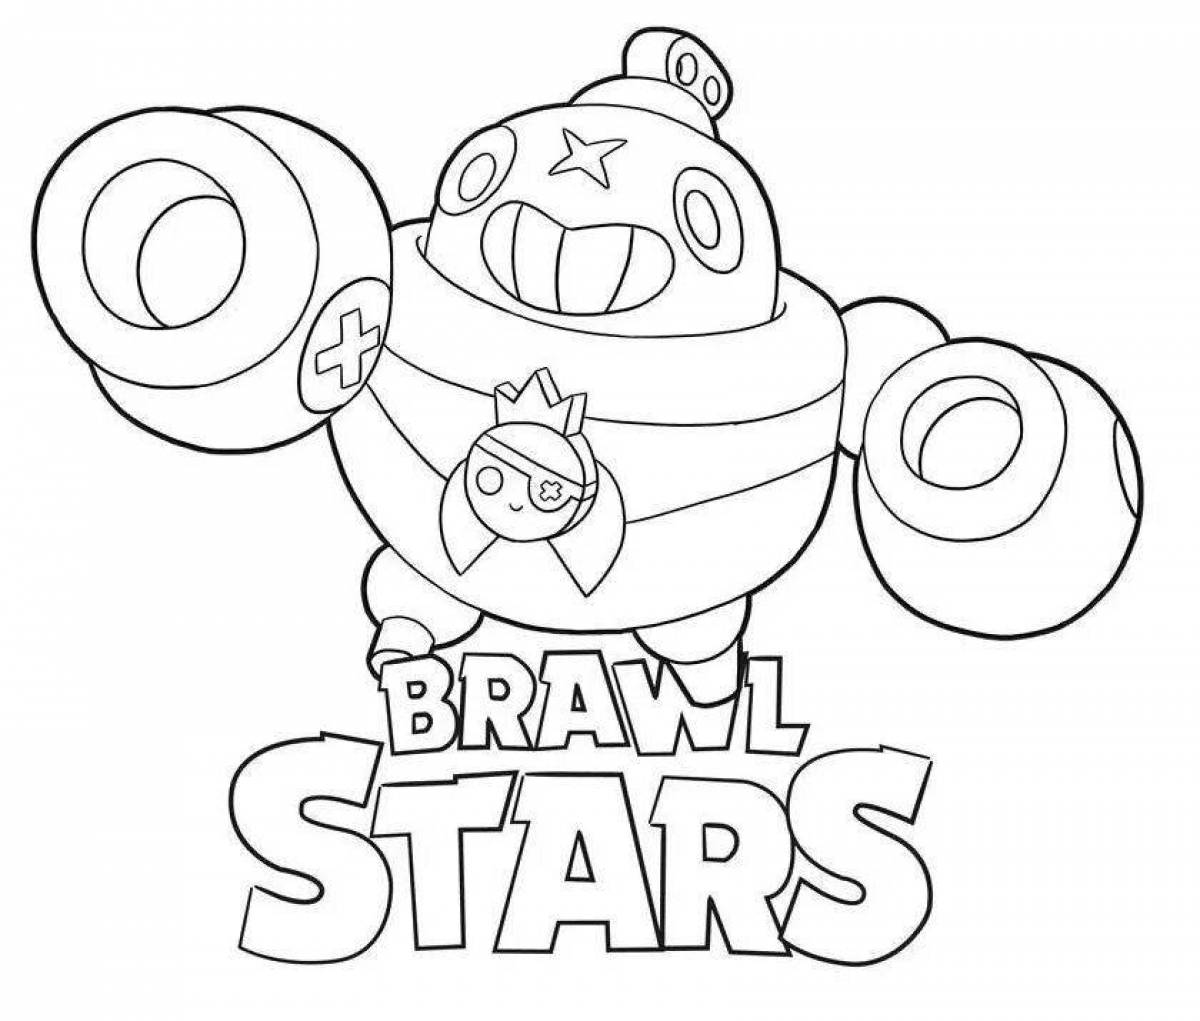 Coloring amazing buster brawl stars